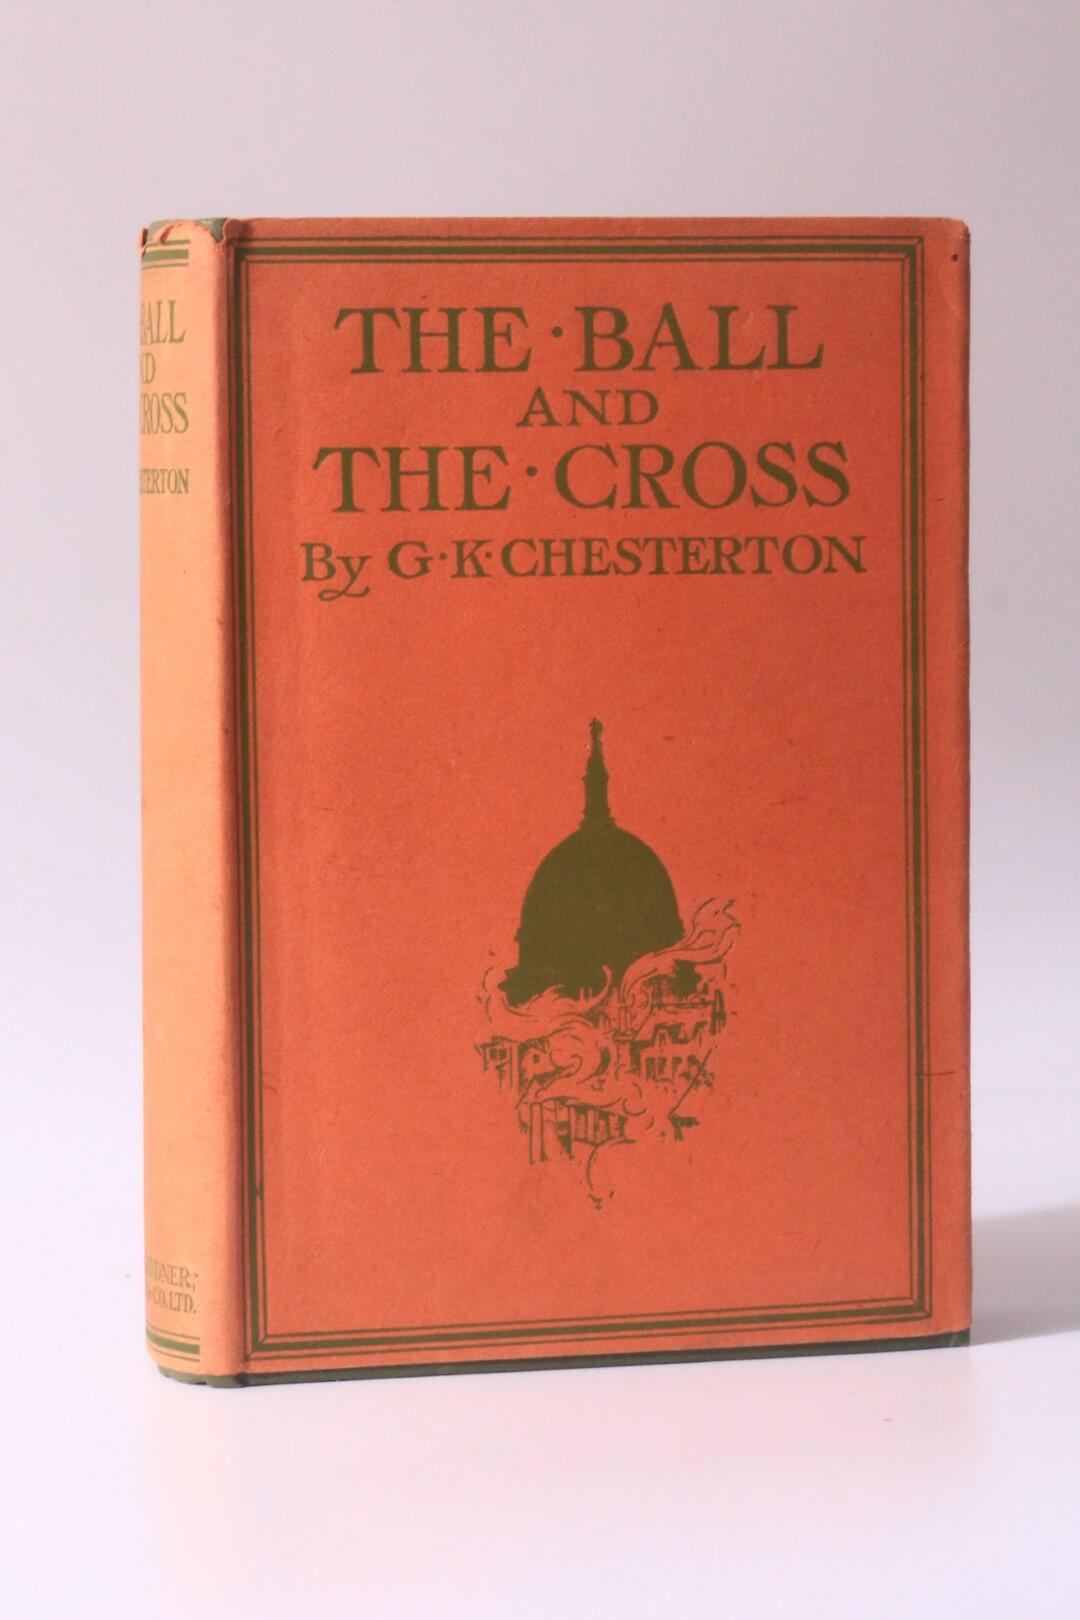 G.K. Chesterton - The Ball and the Cross - Wells Gardner, Darton & Co., 1910, First Edition.